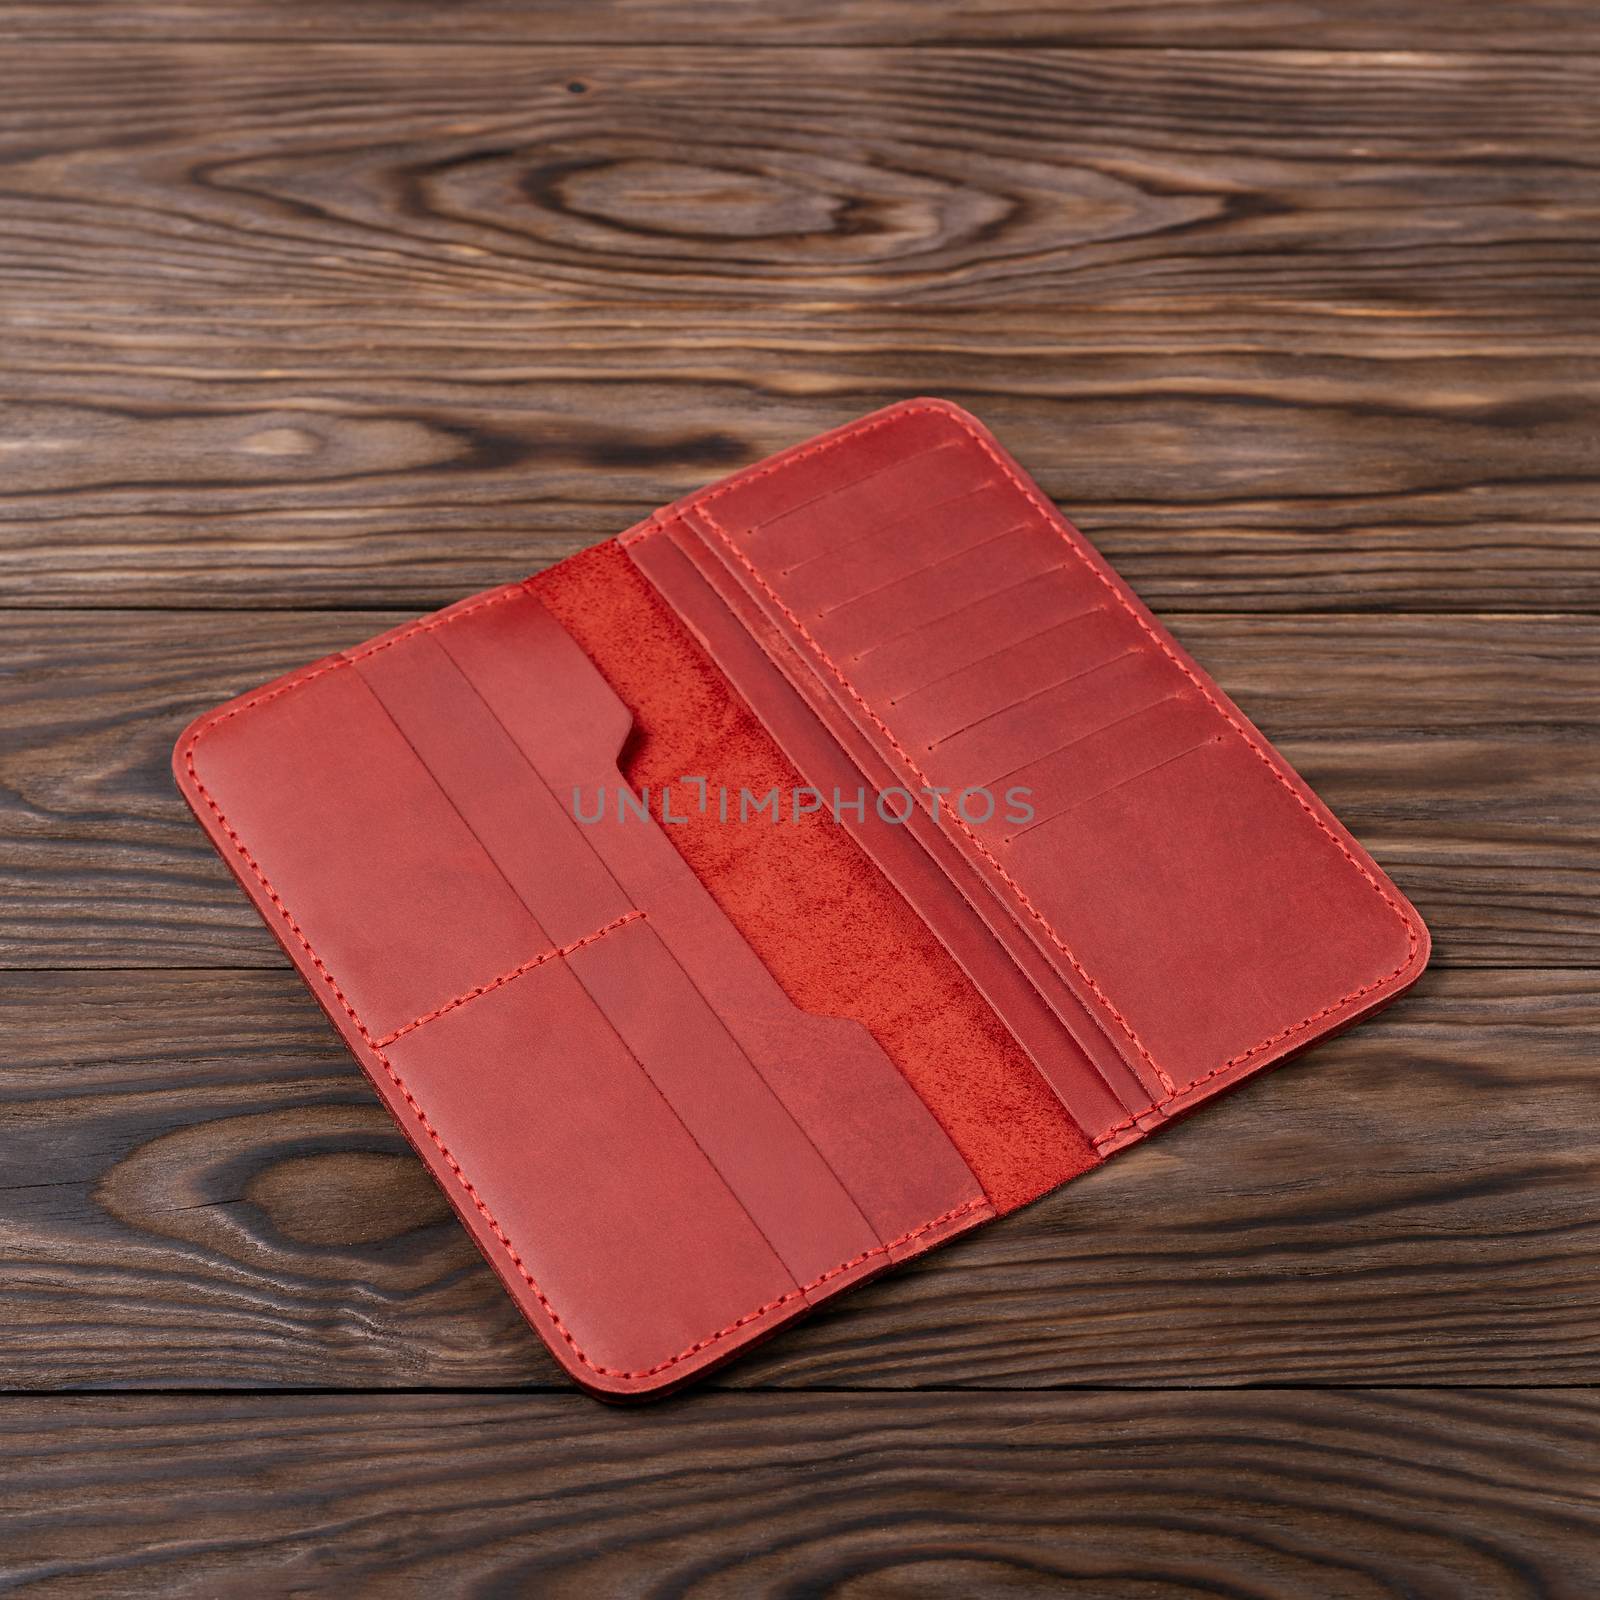 Hue red color handmade leather porte-monnaie on wooden textured background. Purse is opened and empty. Side view. Stock photo of luxury accessories. by alexsdriver